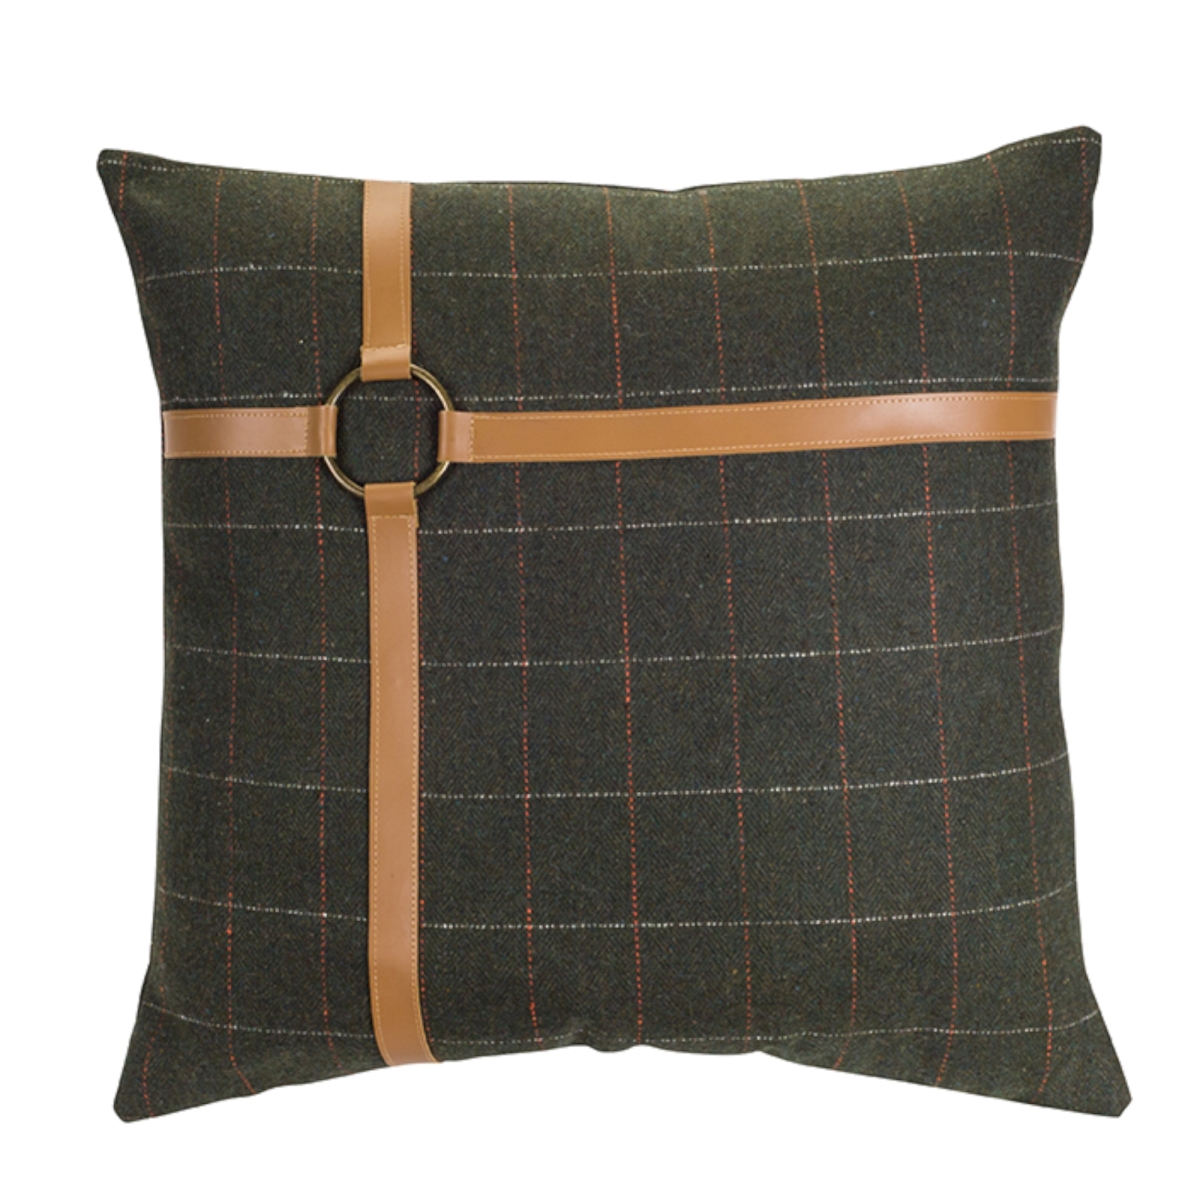 73508ds 7 X 17 In. Polyester Checkered Pillow, Green & Brown - Set Of 2